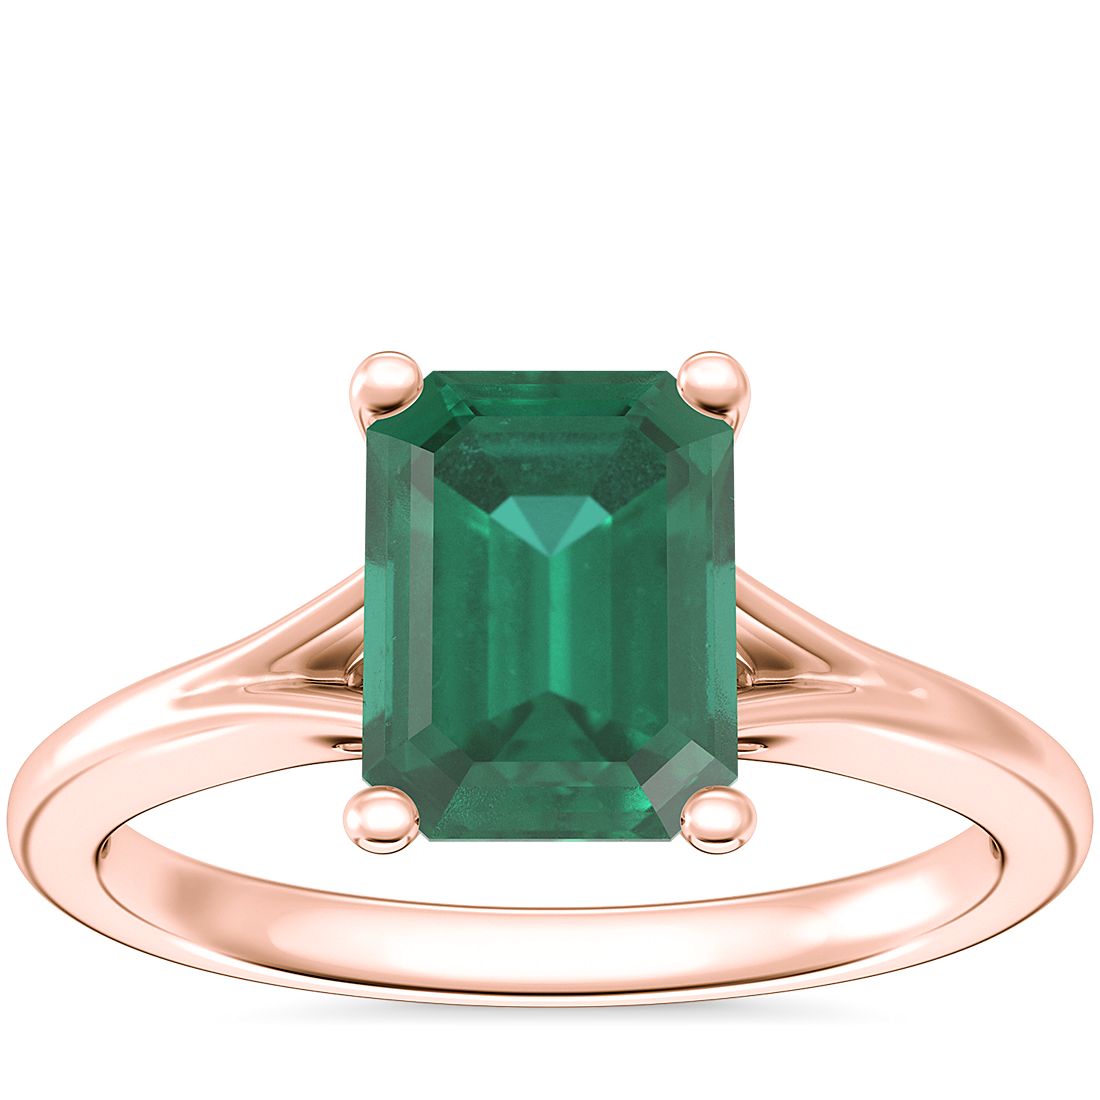 Petite Split Shank Solitaire Engagement Ring with Emerald-Cut Emerald in 14k Rose Gold (8x6mm)